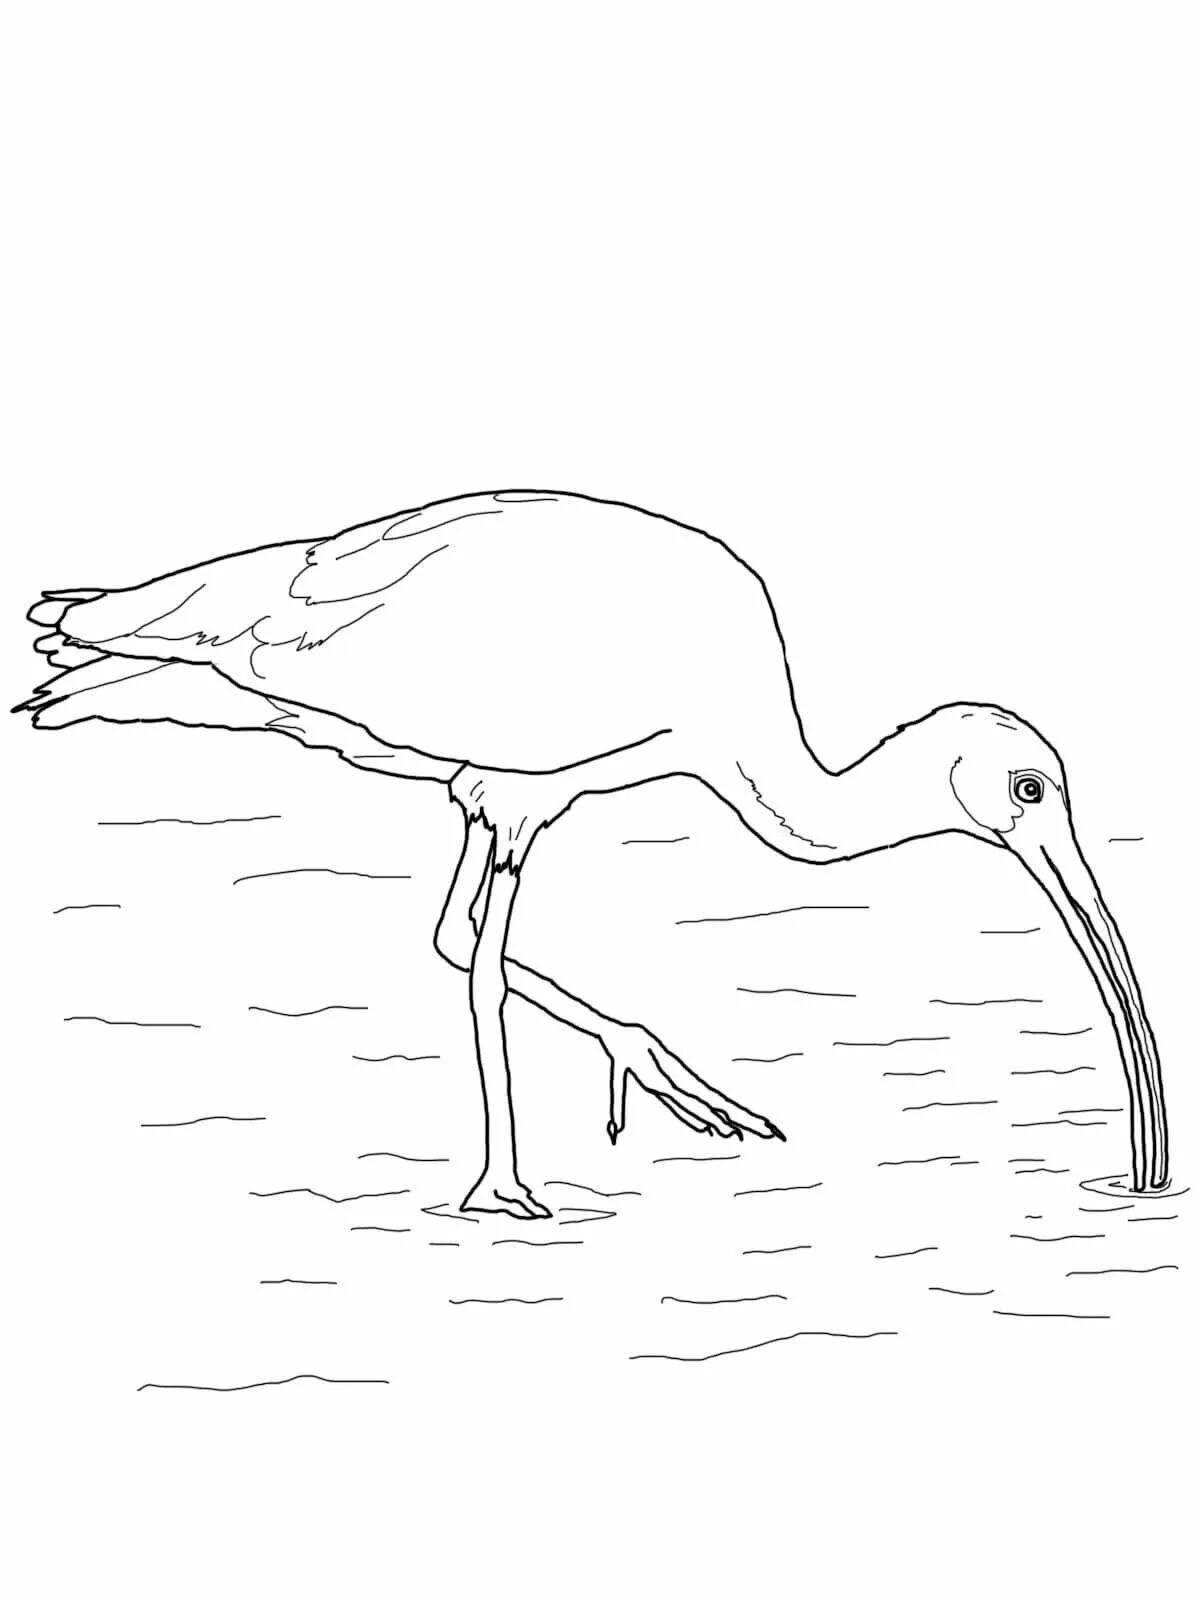 Bold ibis paint coloring page